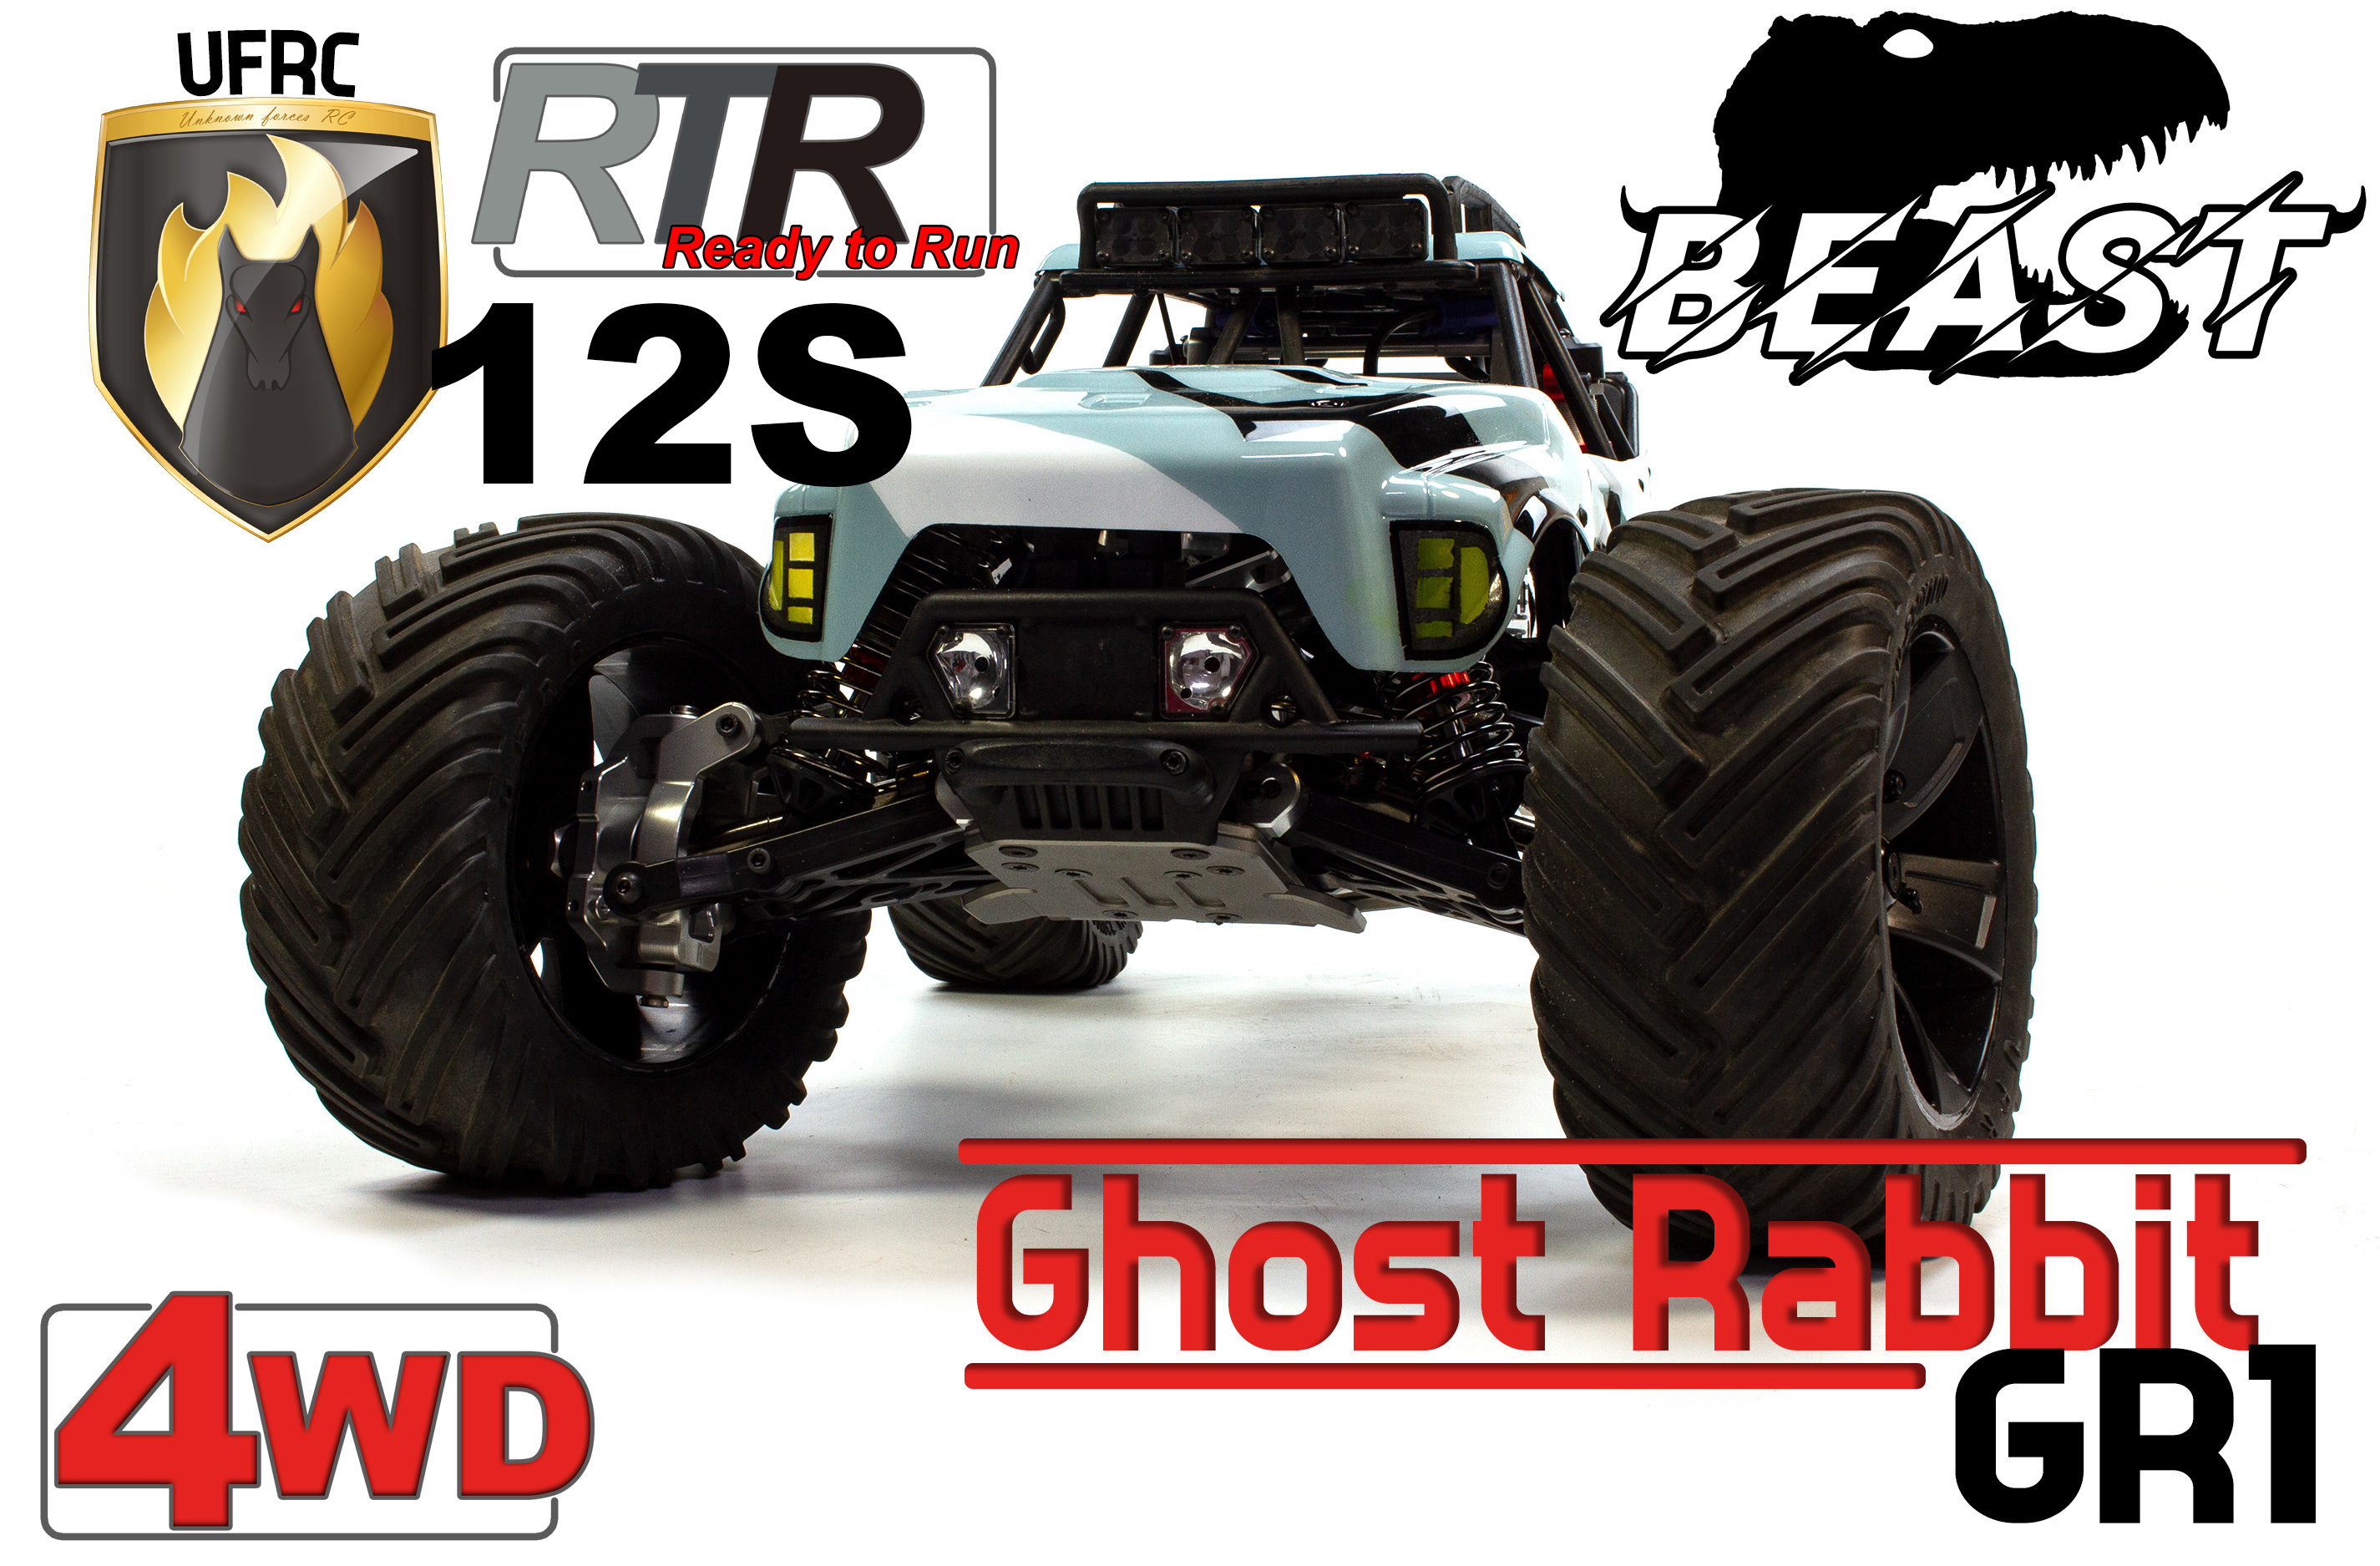 UFRC Ghost Rabbit GR1 4WD 1:5 Brushless Buggy 12S, RTR Version